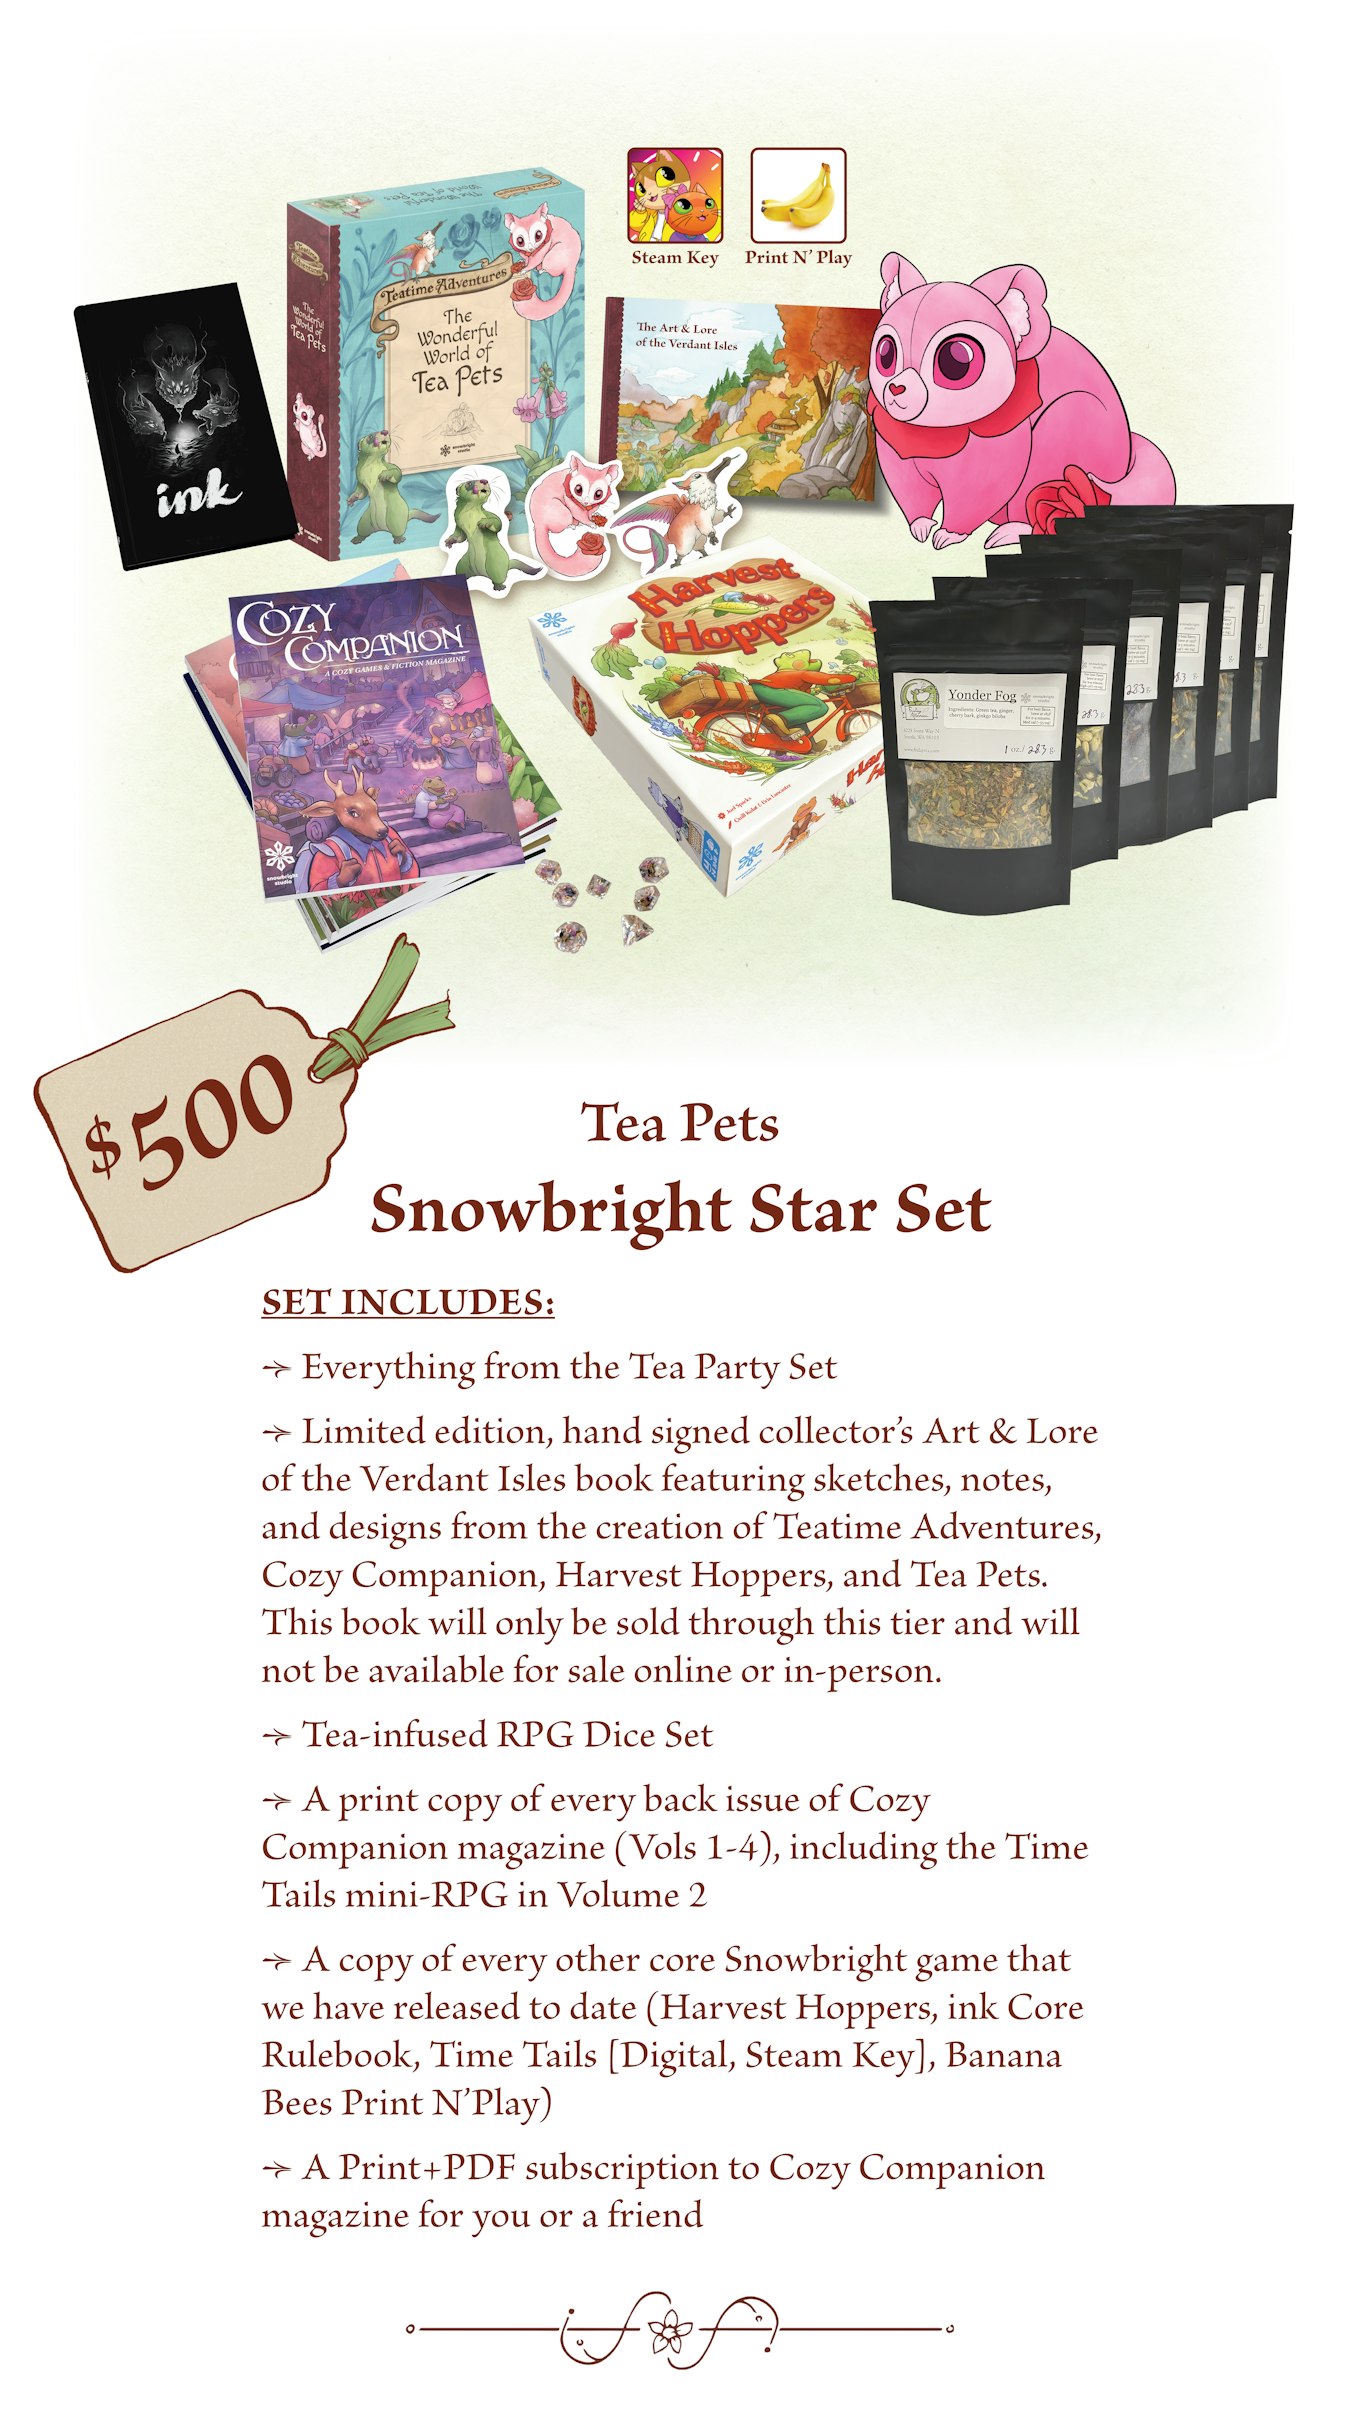 $500 - Snowbright Star Set, Everything from the Tea Party Set, Limited edition, hand signed collector’s Art & Lore of the Verdant Isles book featuring sketches, notes, and designs from the creation of Teatime Adventures, Cozy Companion, Harvest Hoppers, and Tea Pets. This book will only be sold through this tier and will not be available for sale online or in-person.Tea-infused RPG Dice. Set A print copy of every back issue of Cozy Companion magazine (Vols 1-4), including the Time Tails mini-RPG in Volume 2. A copy of every other core Snowbright game that we have released to date (Harvest Hoppers, ink Core Rulebook, Time Tails [Digital, Steam Key], Banana Bees PNP). A Print+PDF subscription to Cozy Companion magazine for you or a friend